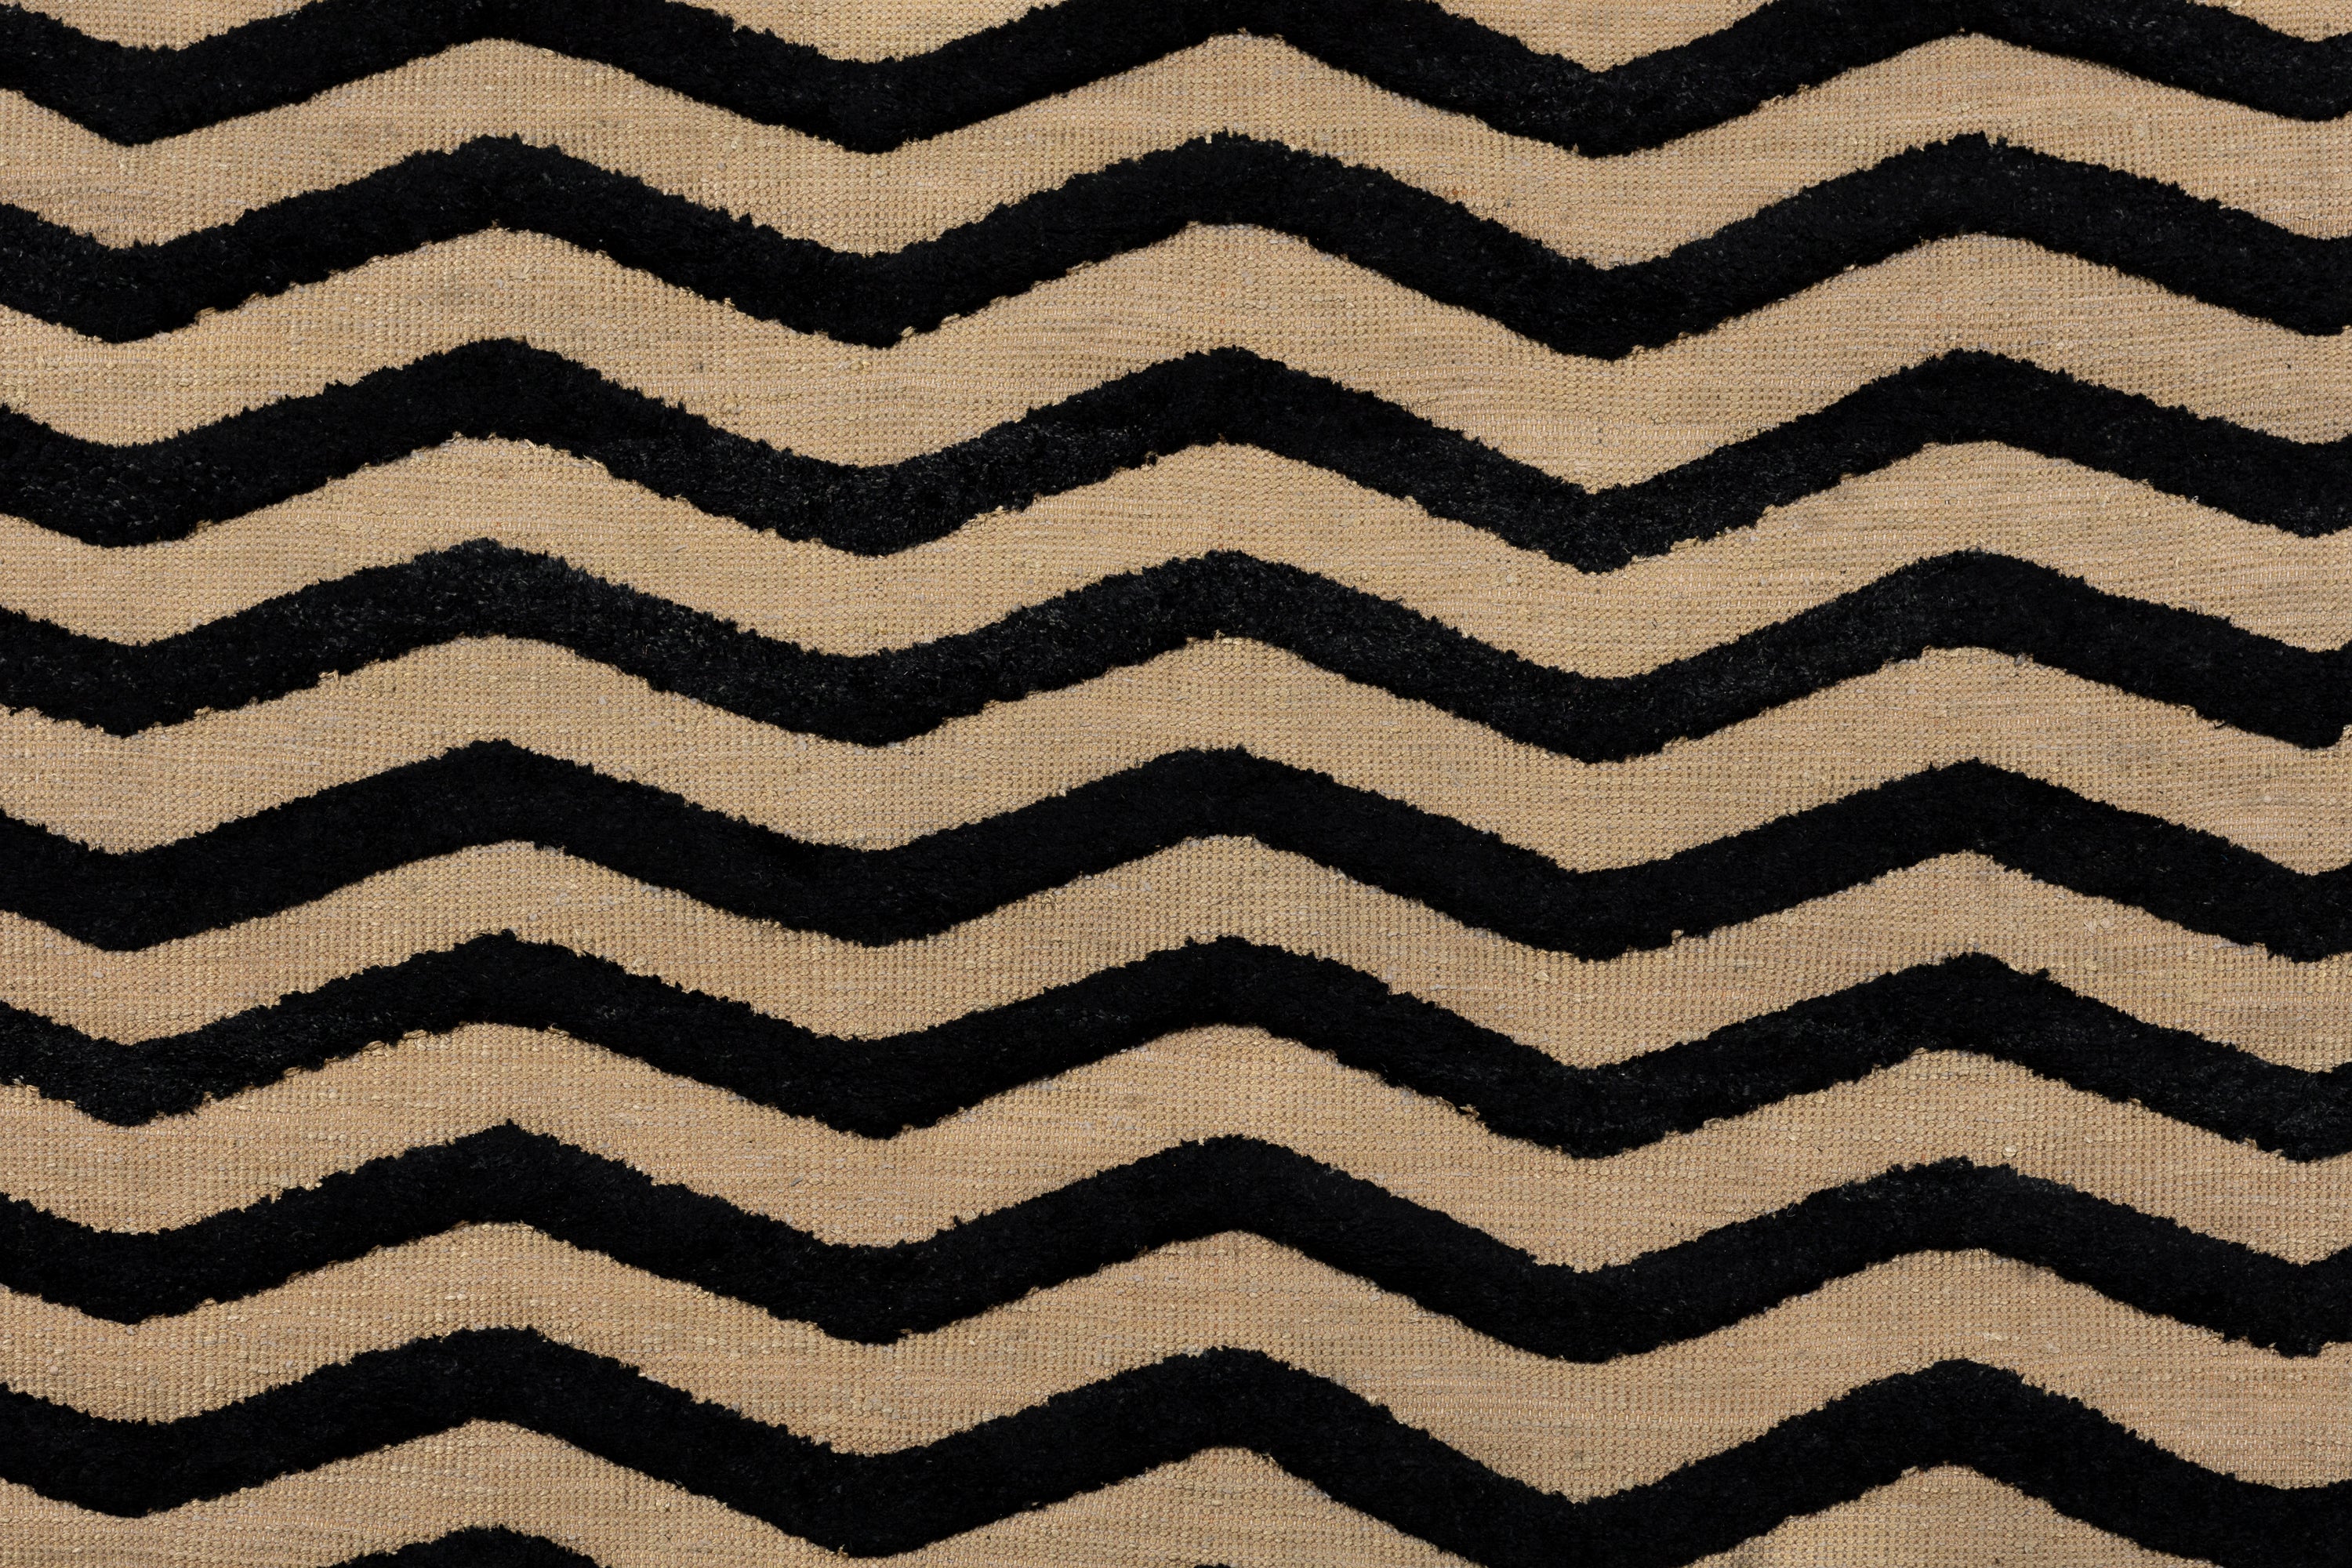 Deatil of the Penta Chevron Rug in Onyx-Ivory a black and white chevron pattern. 